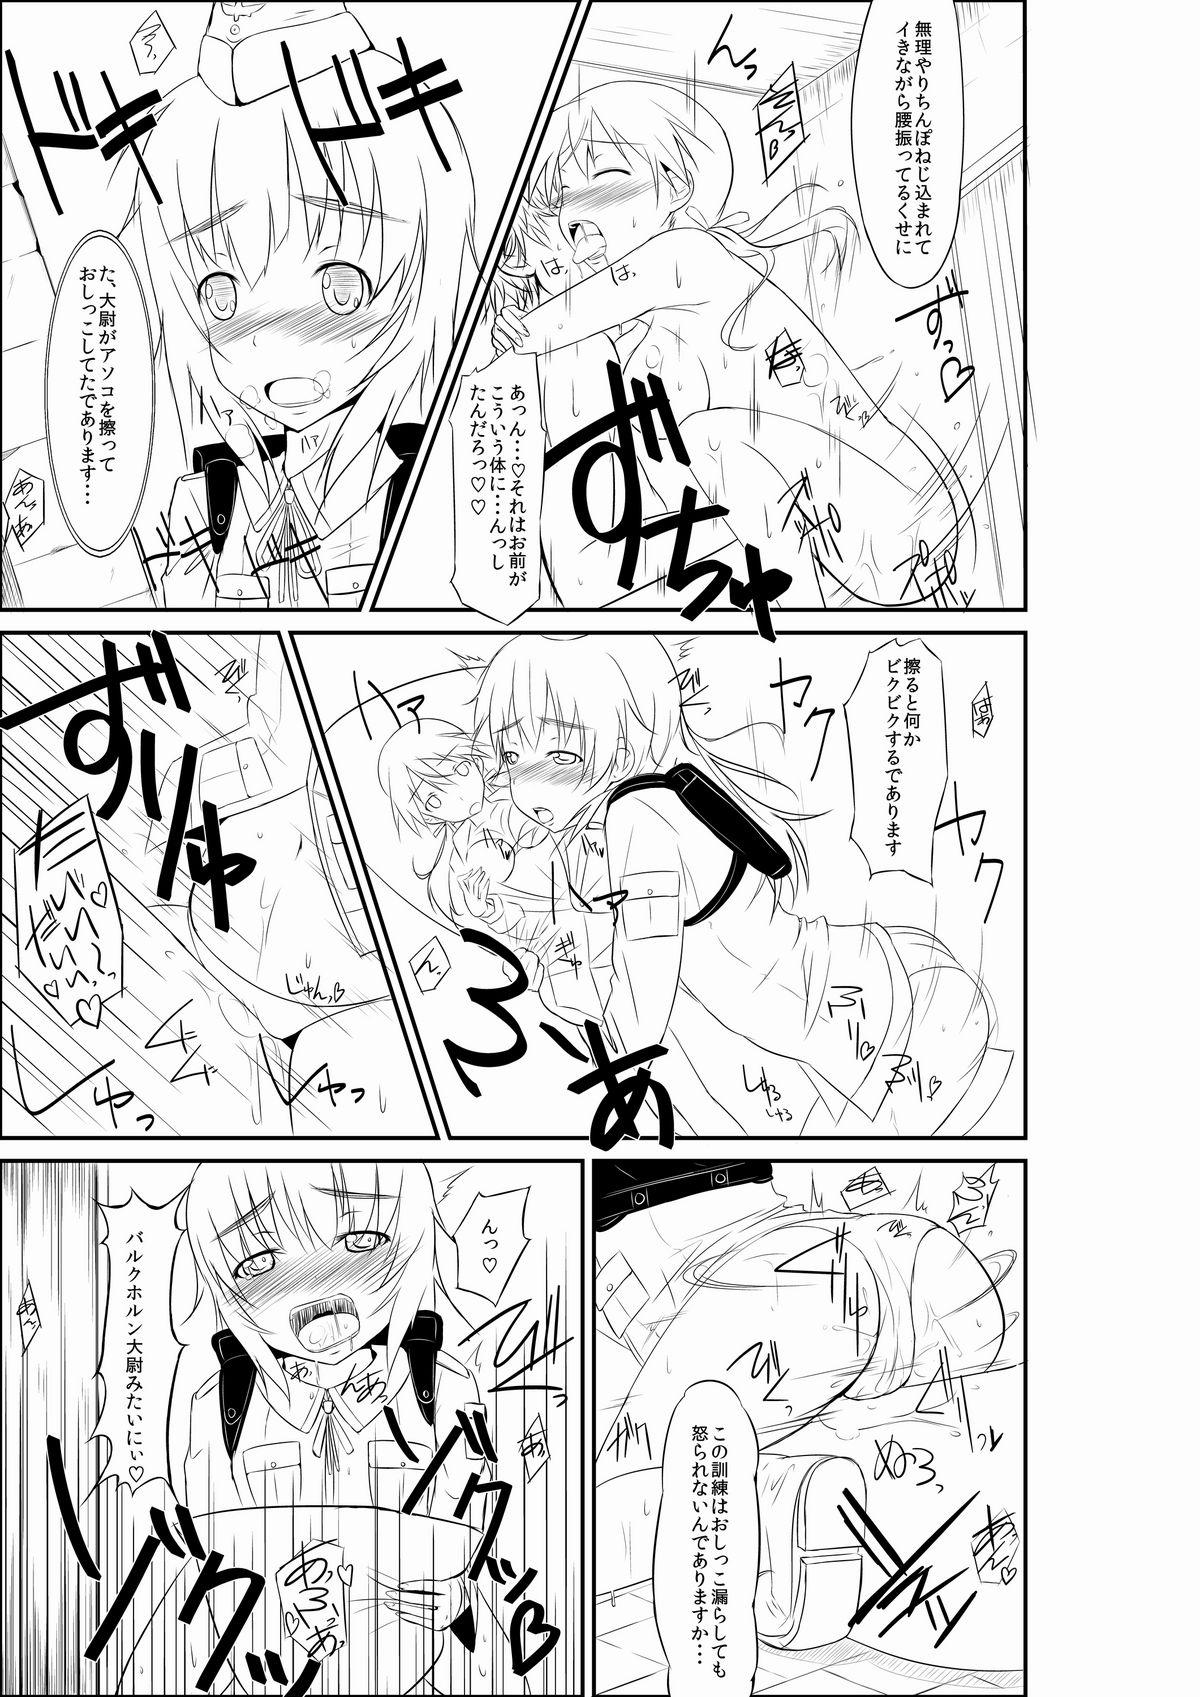 Orgasmo 練習 お姉ちゃんとヘルマちゃん - Strike witches Pounding - Page 7